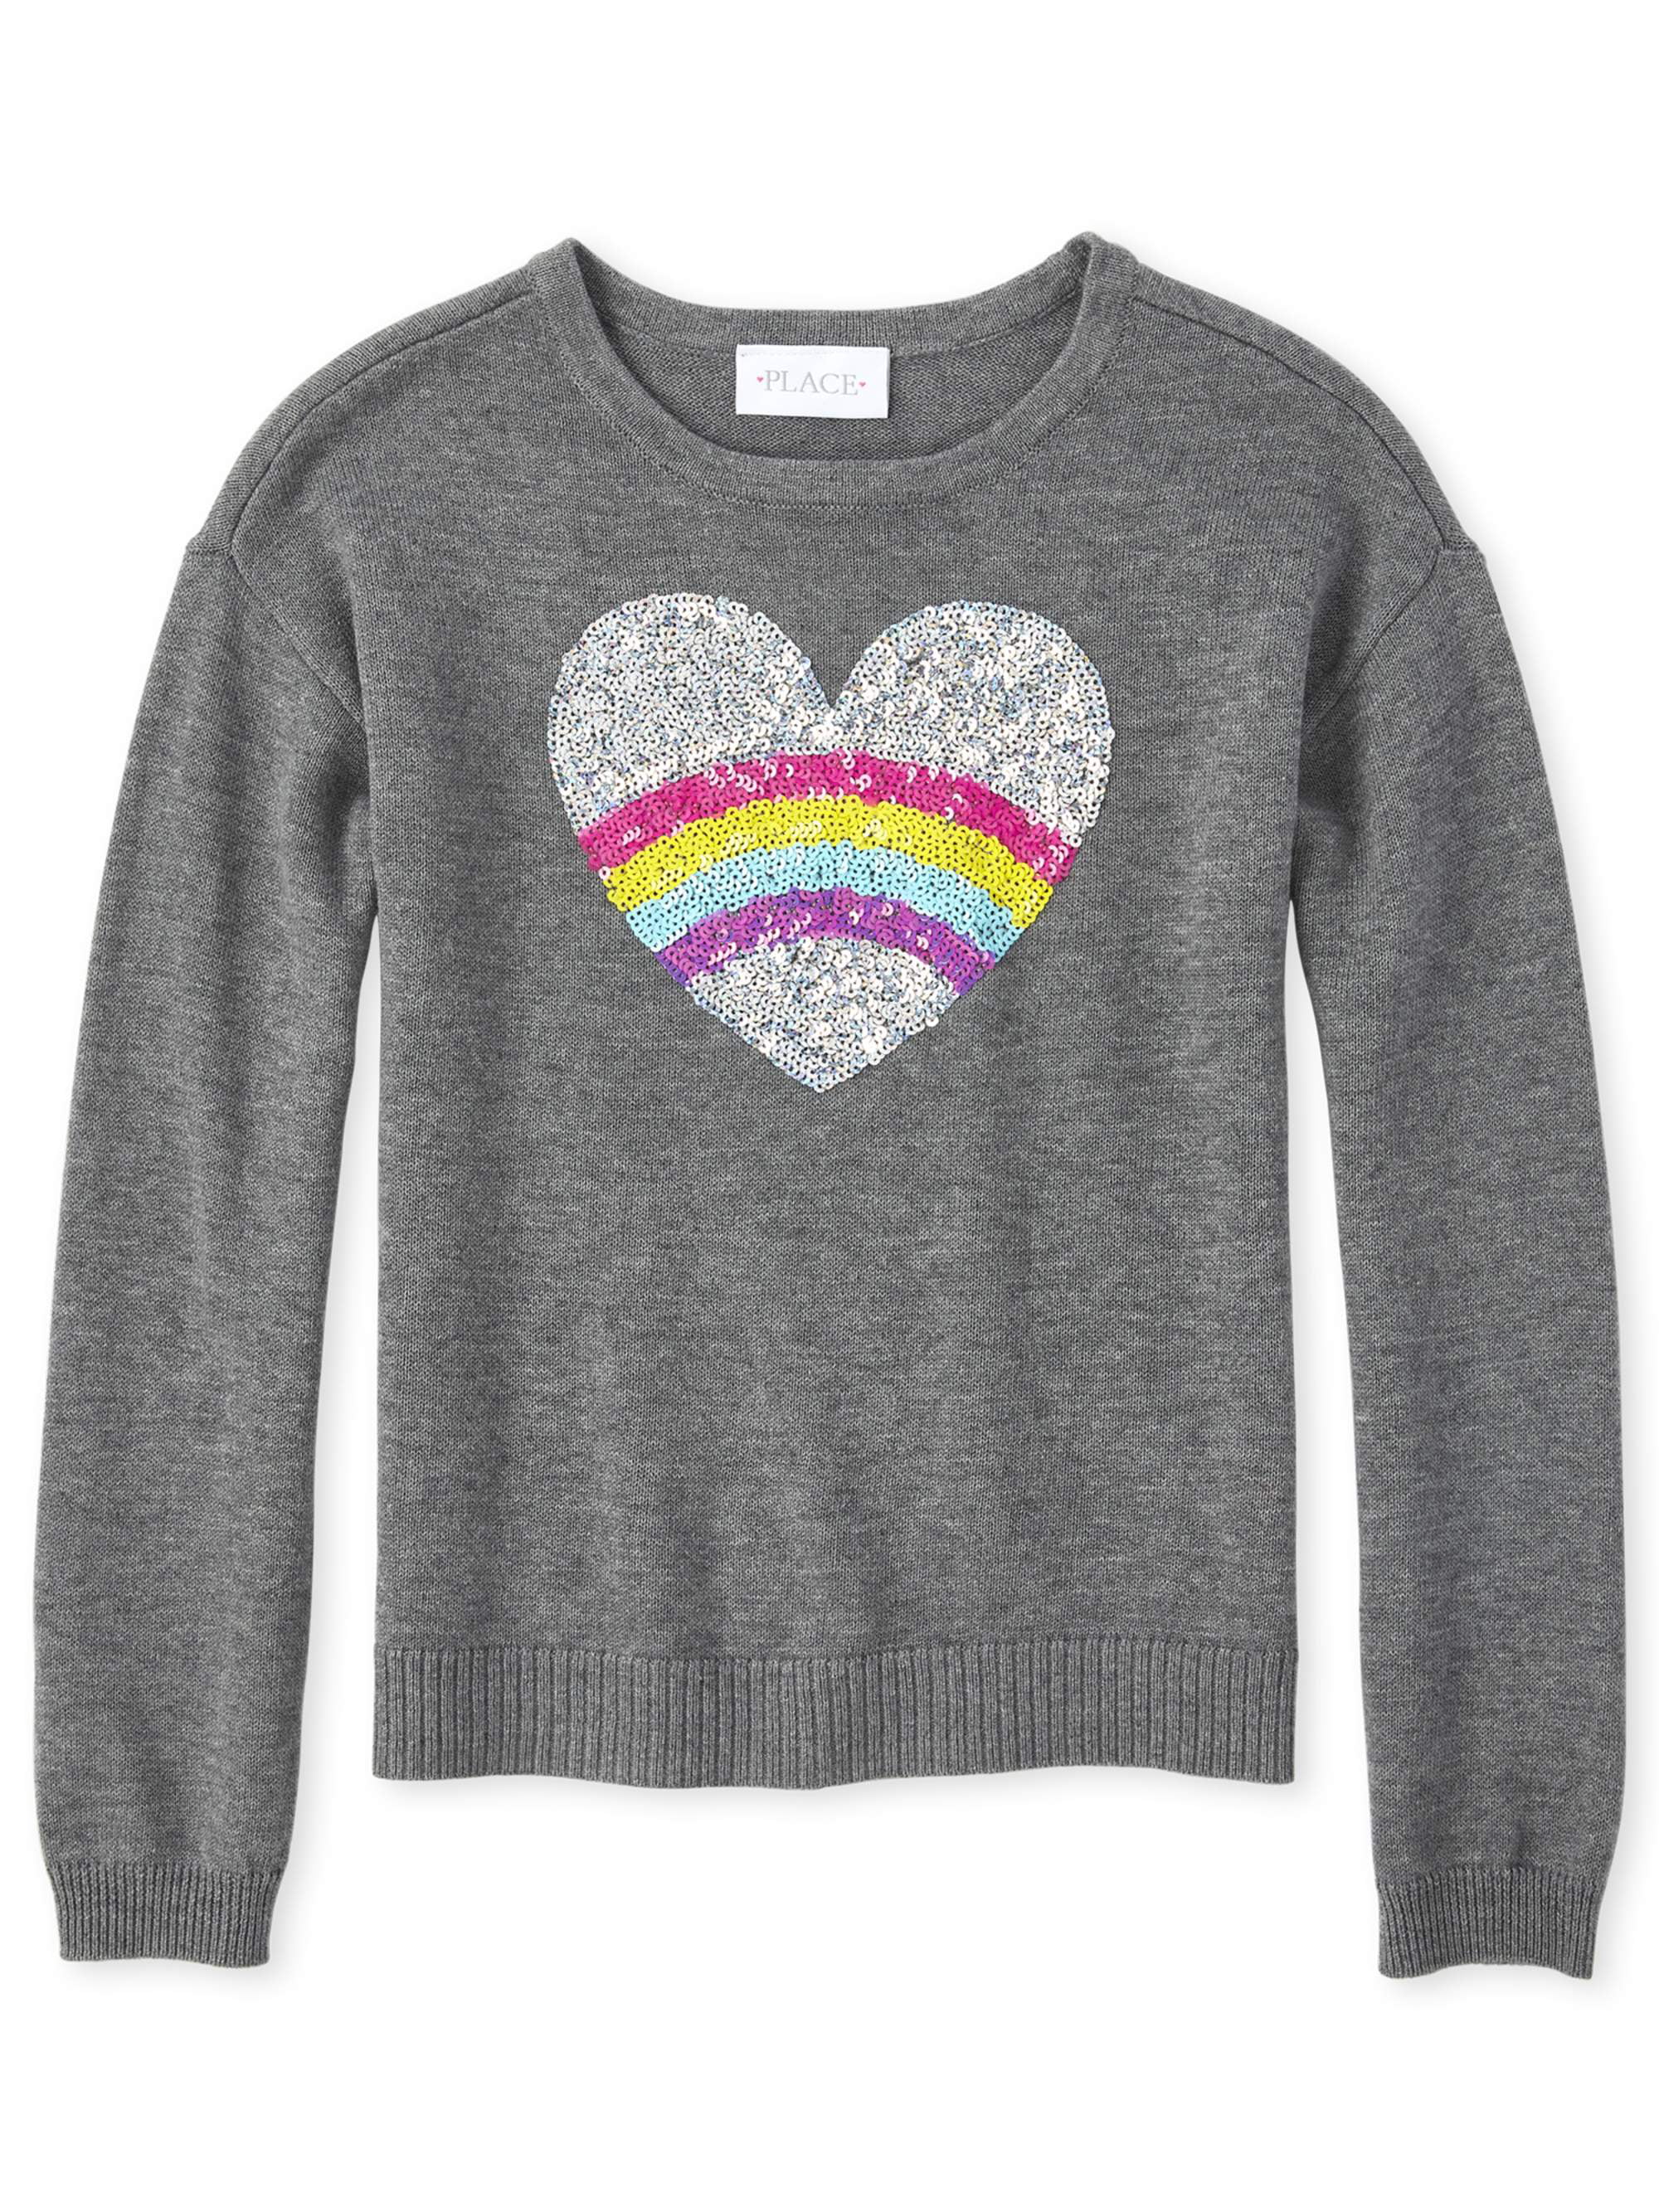 The Childrens Place Girls Sequin Graphic Sweater